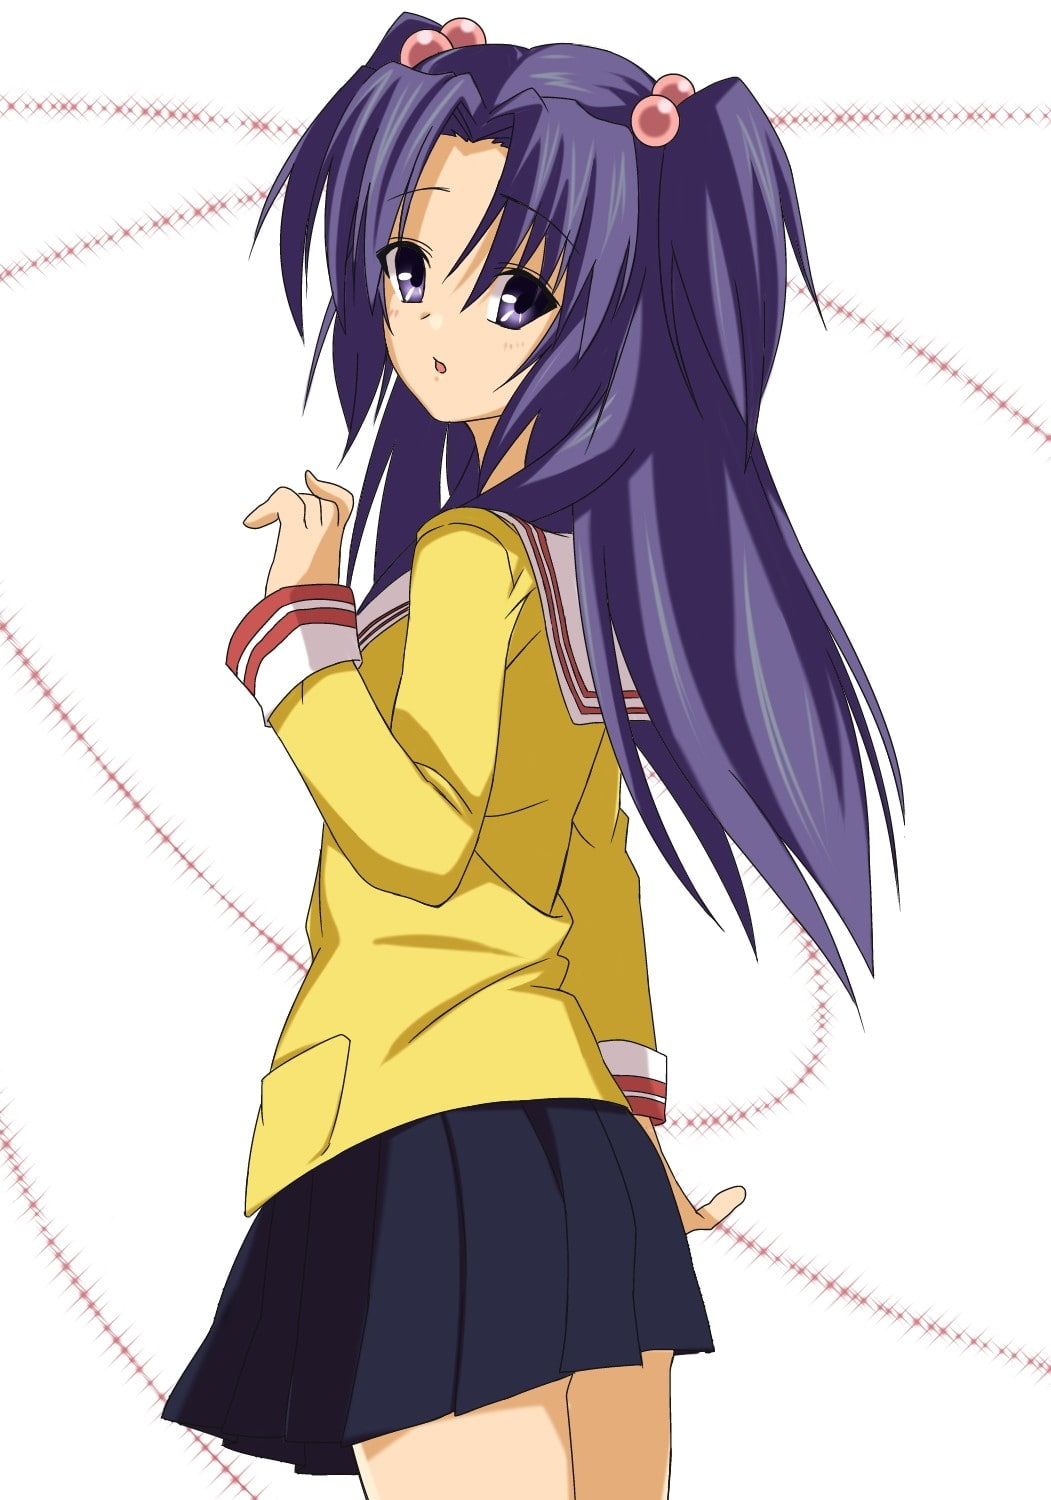 Clannad, anime girls, Ichinose Kotomi, one person, women, low angle view